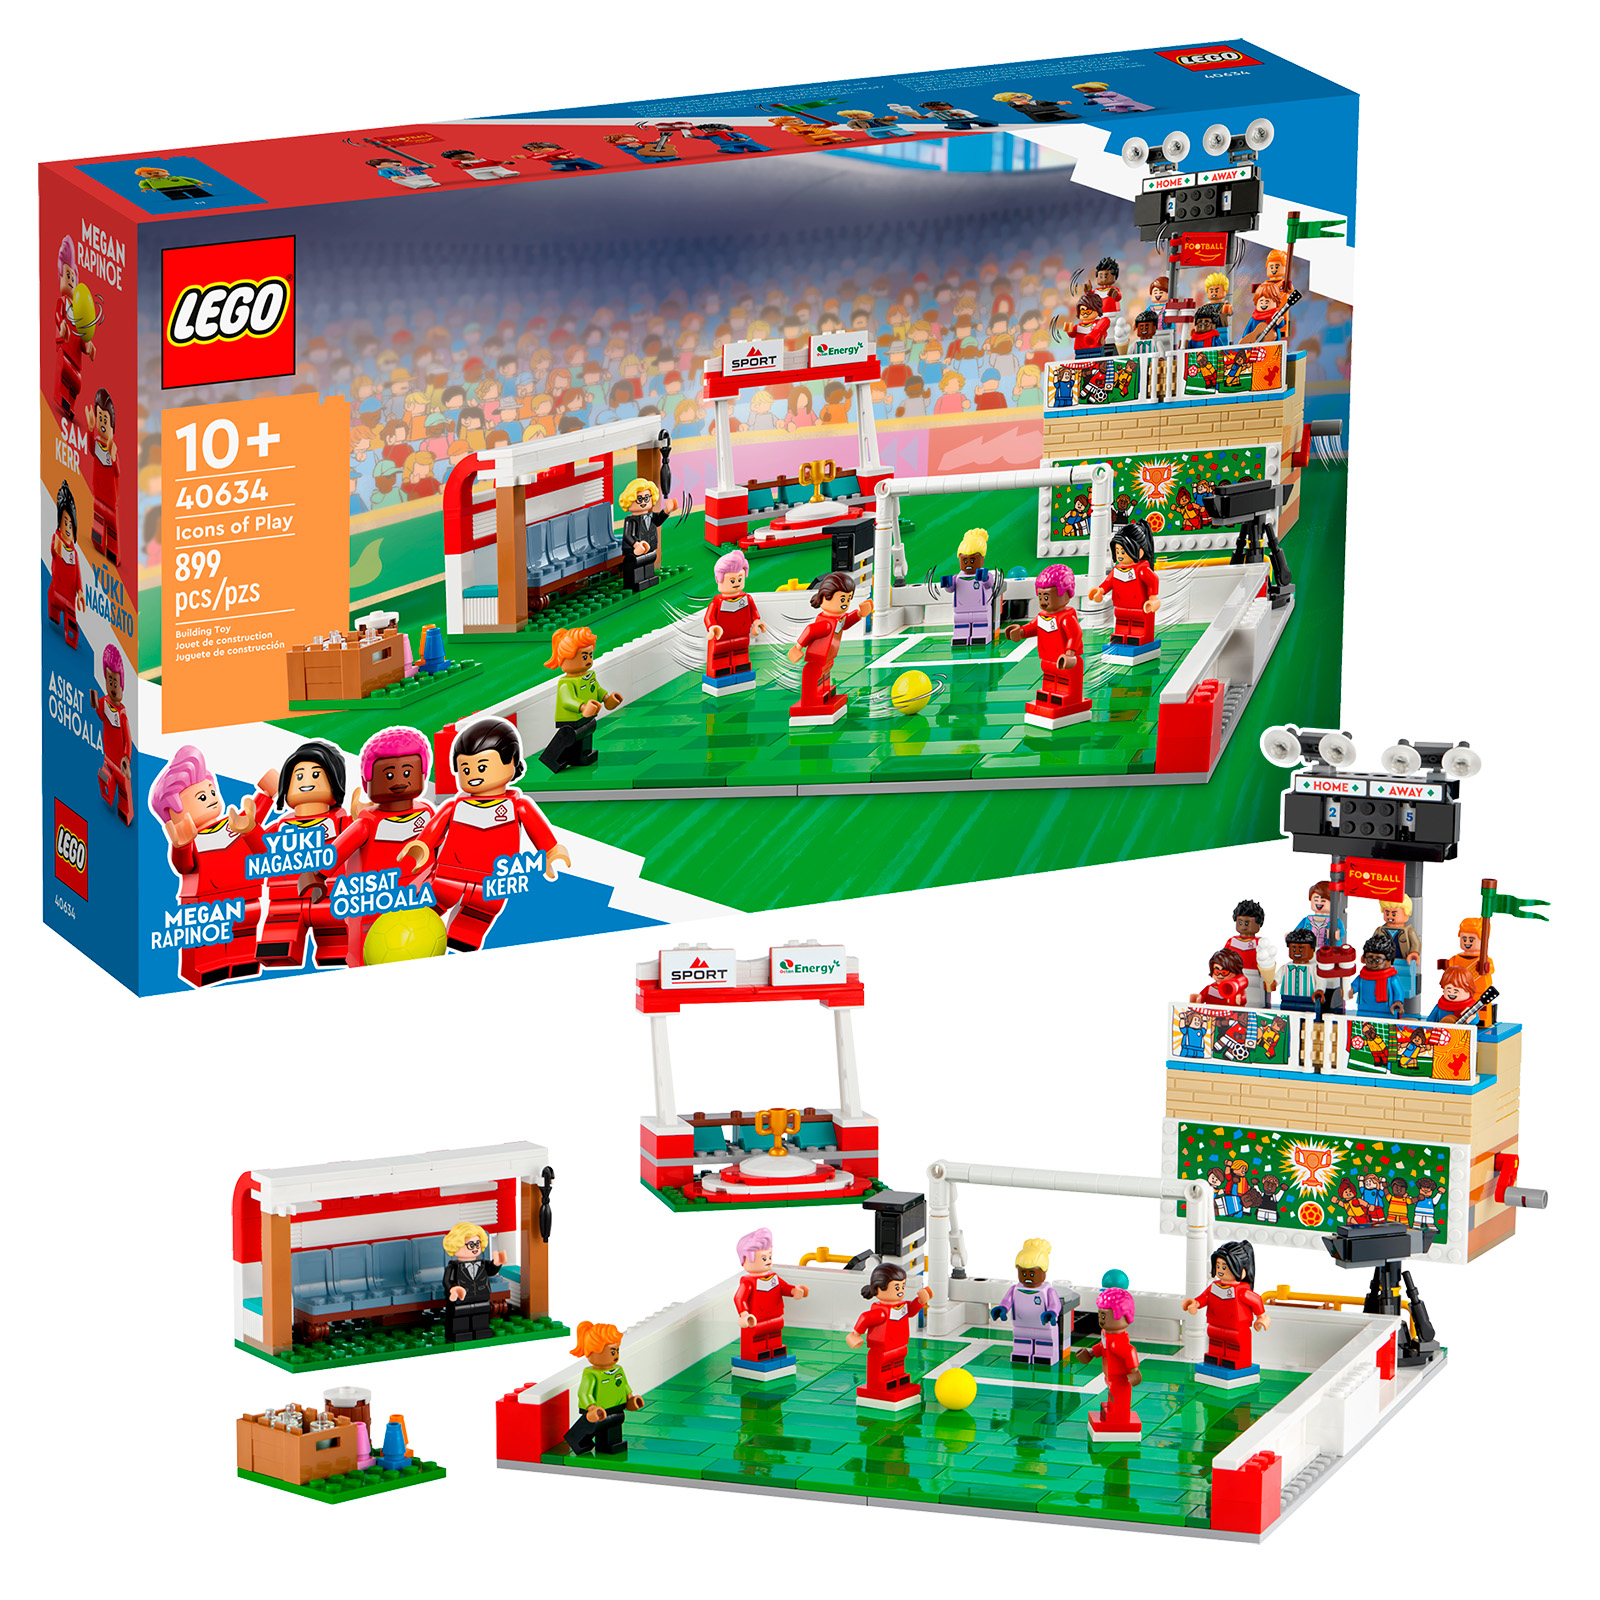 The LEGO Group teams up with the stars of women's football to